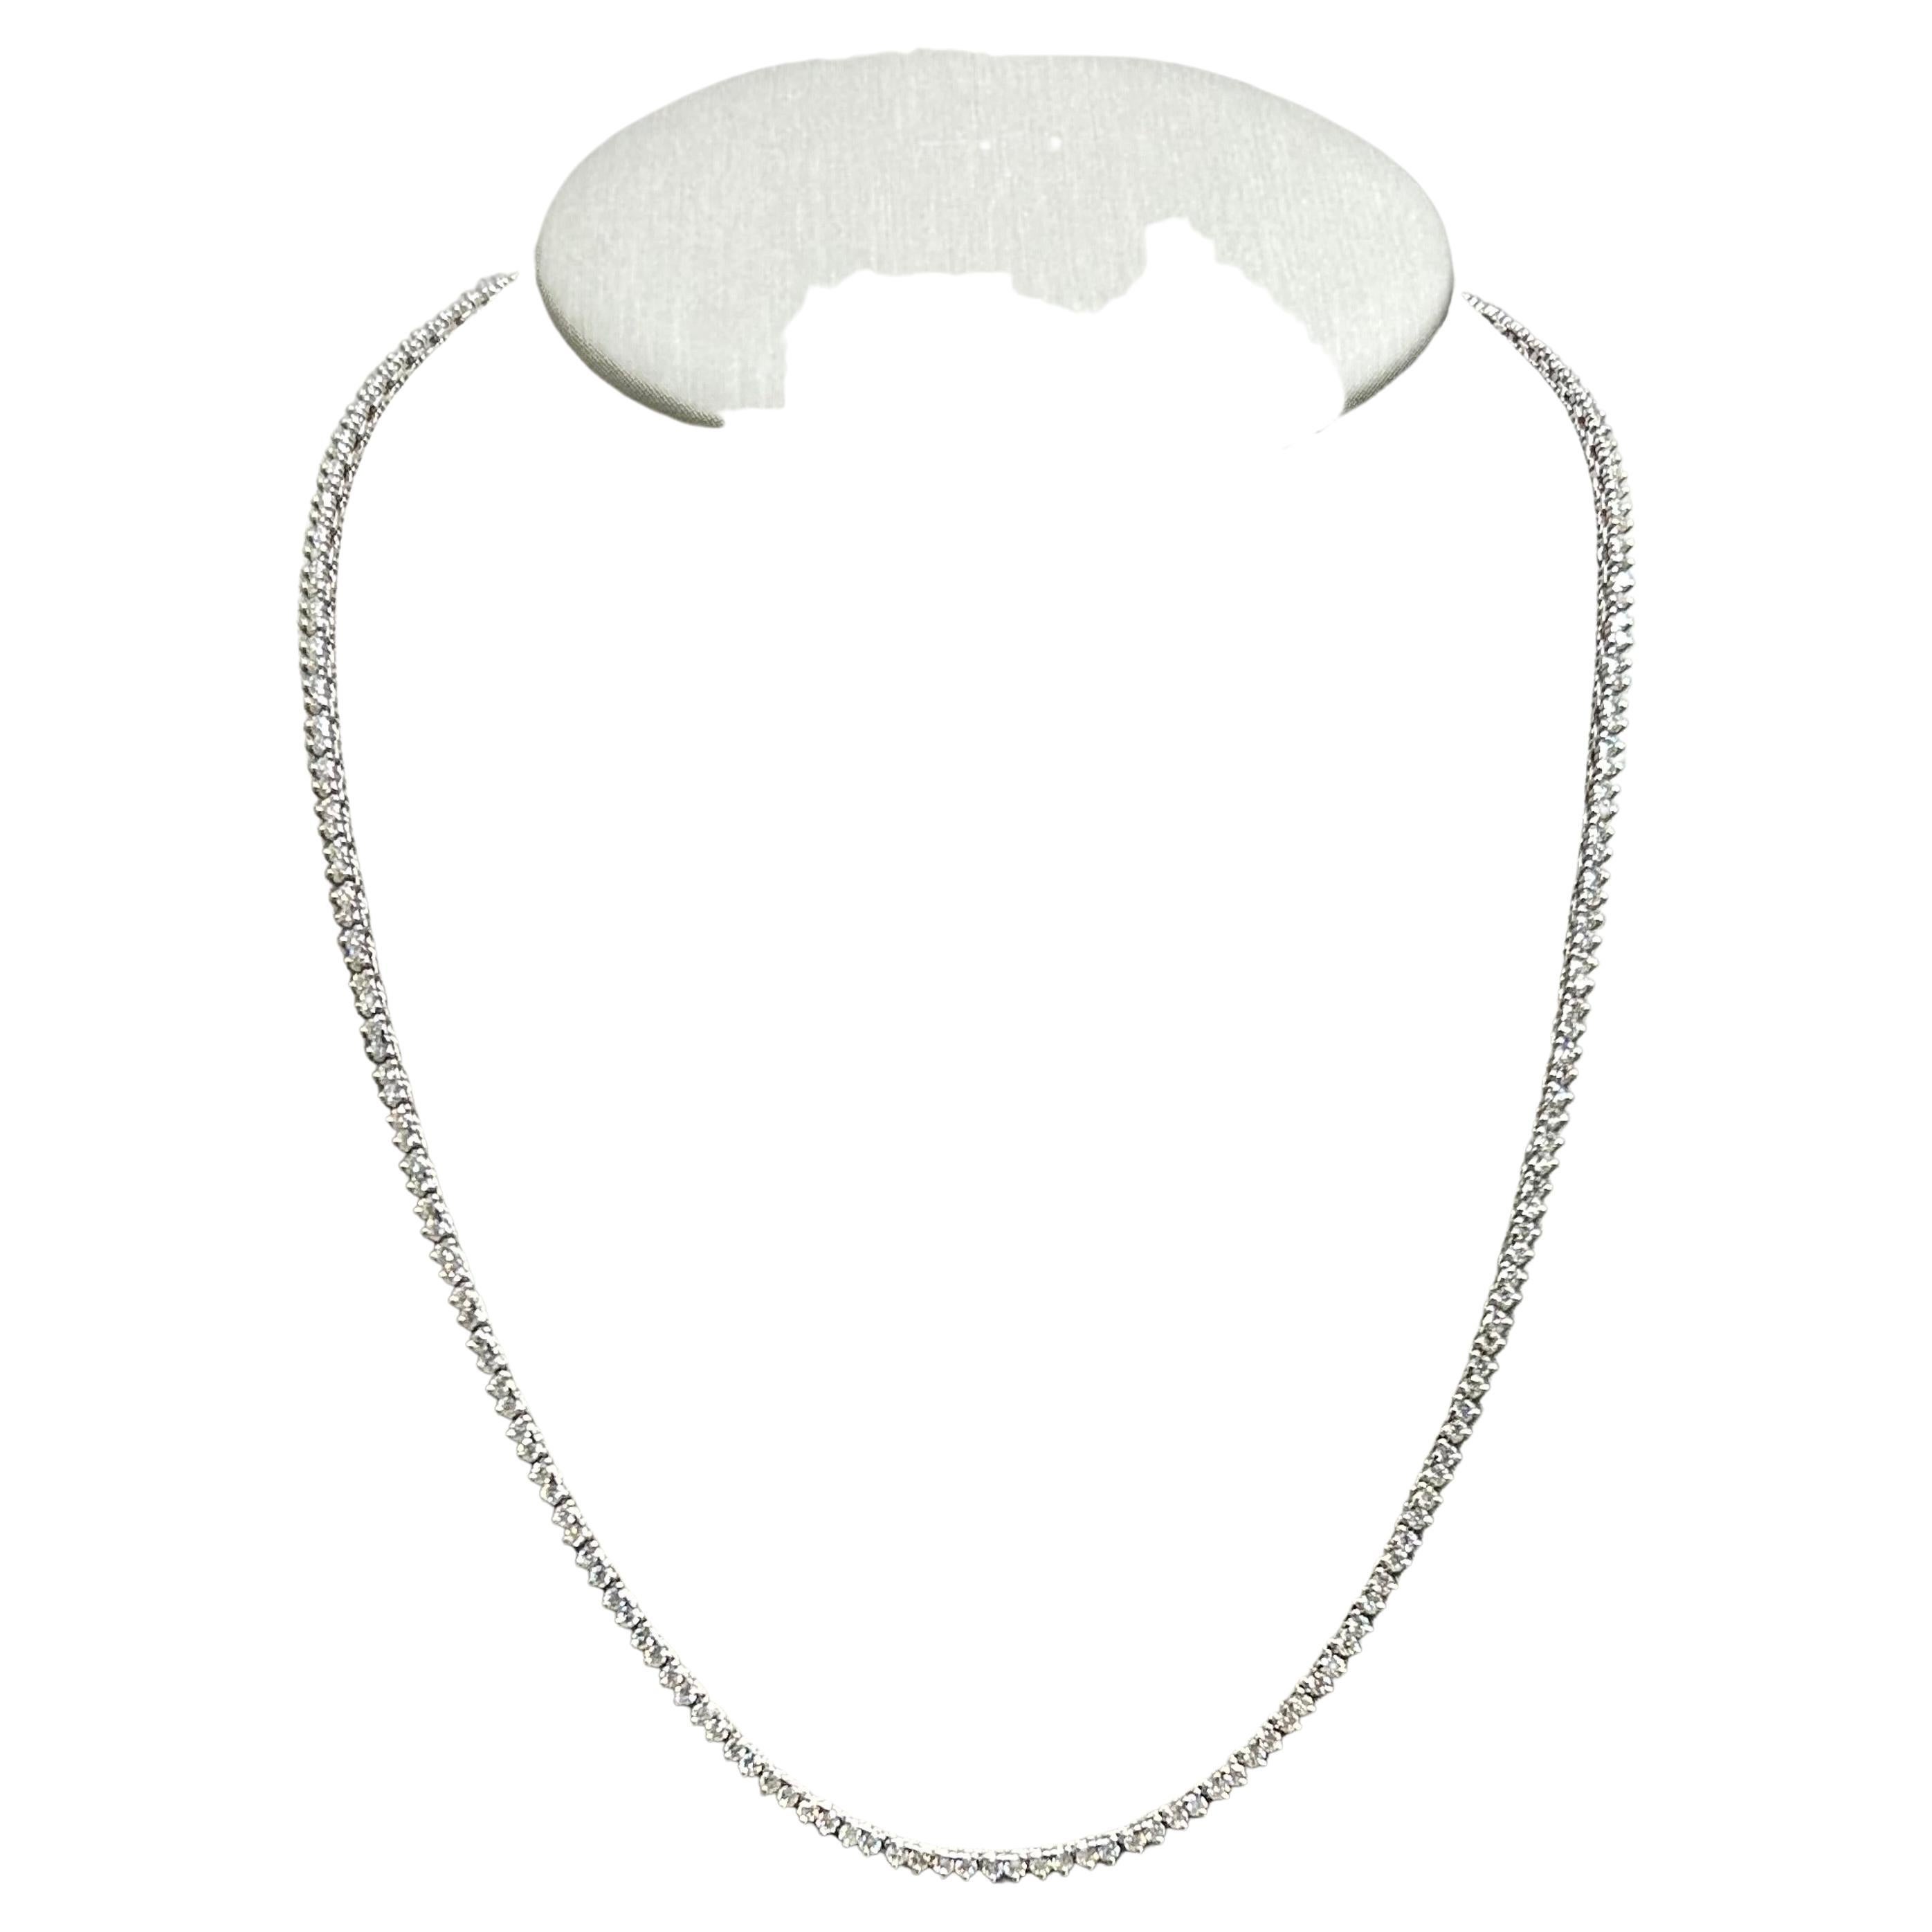 21 Inch Diamond Tennis Necklace In White Gold , 4 , 6 TCW For Sale